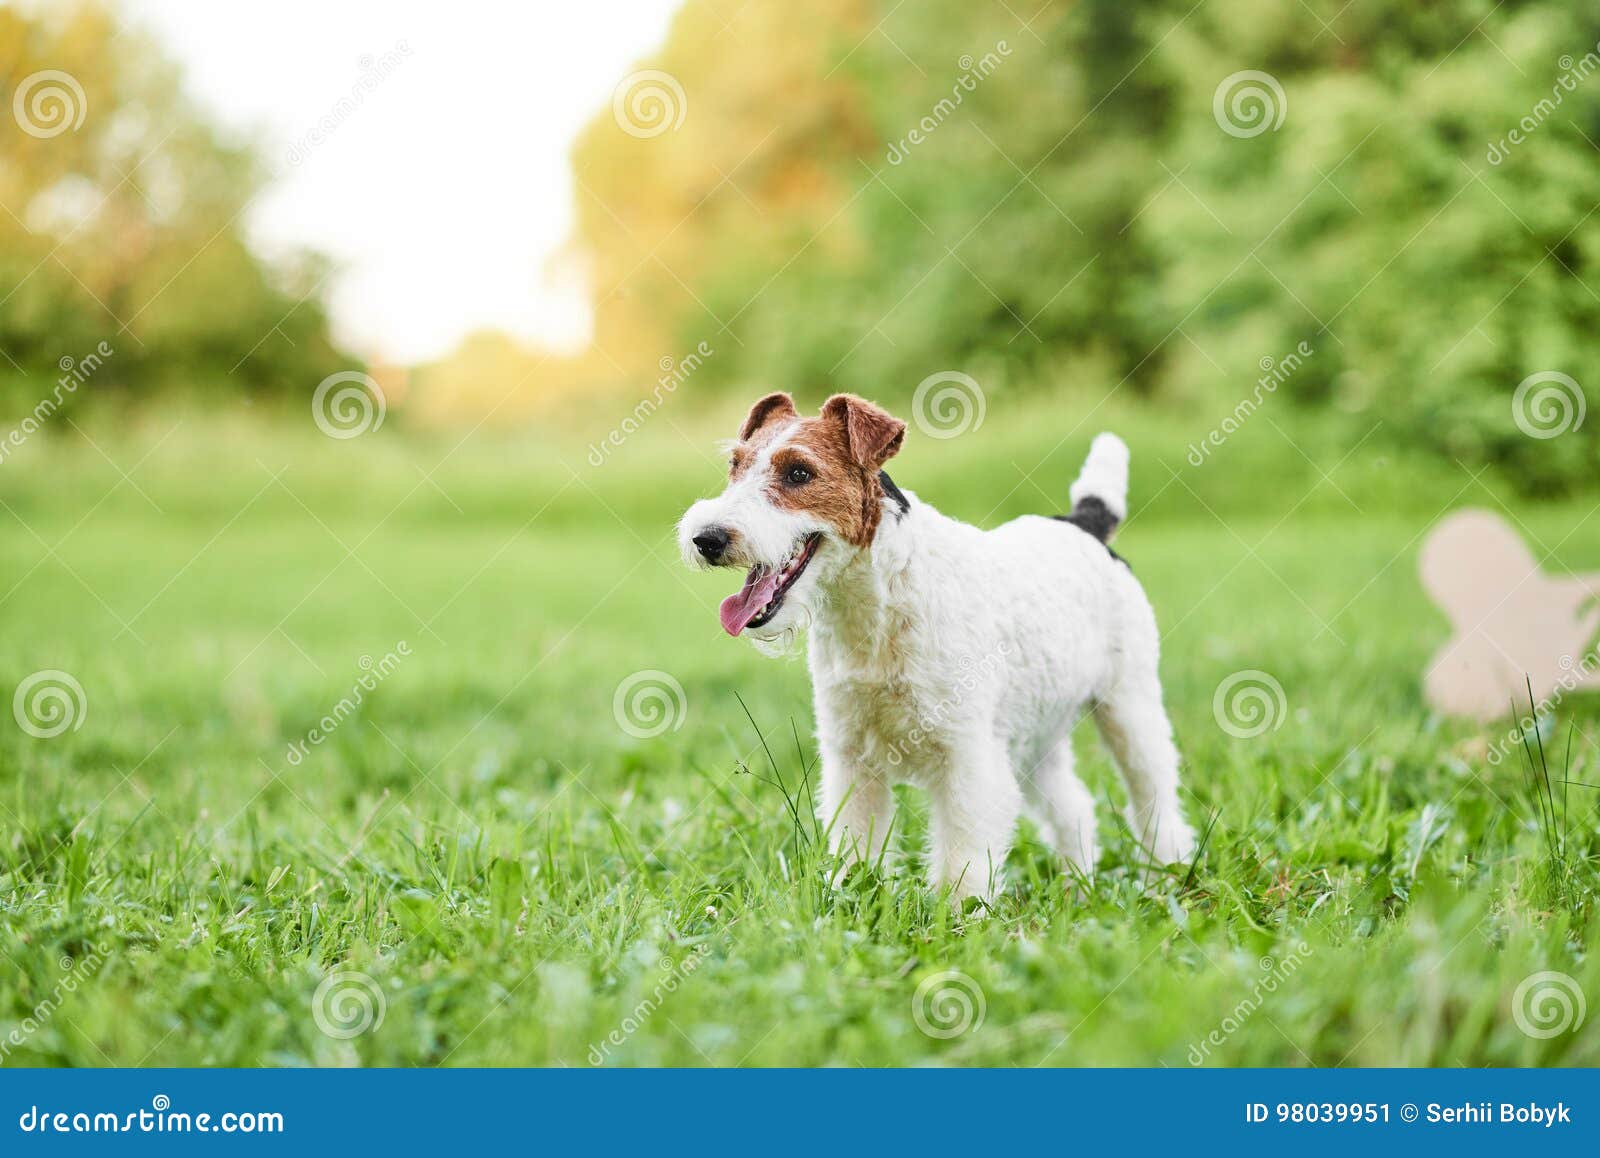 adorable happy fox terrier dog at the park 2018 new year greetin